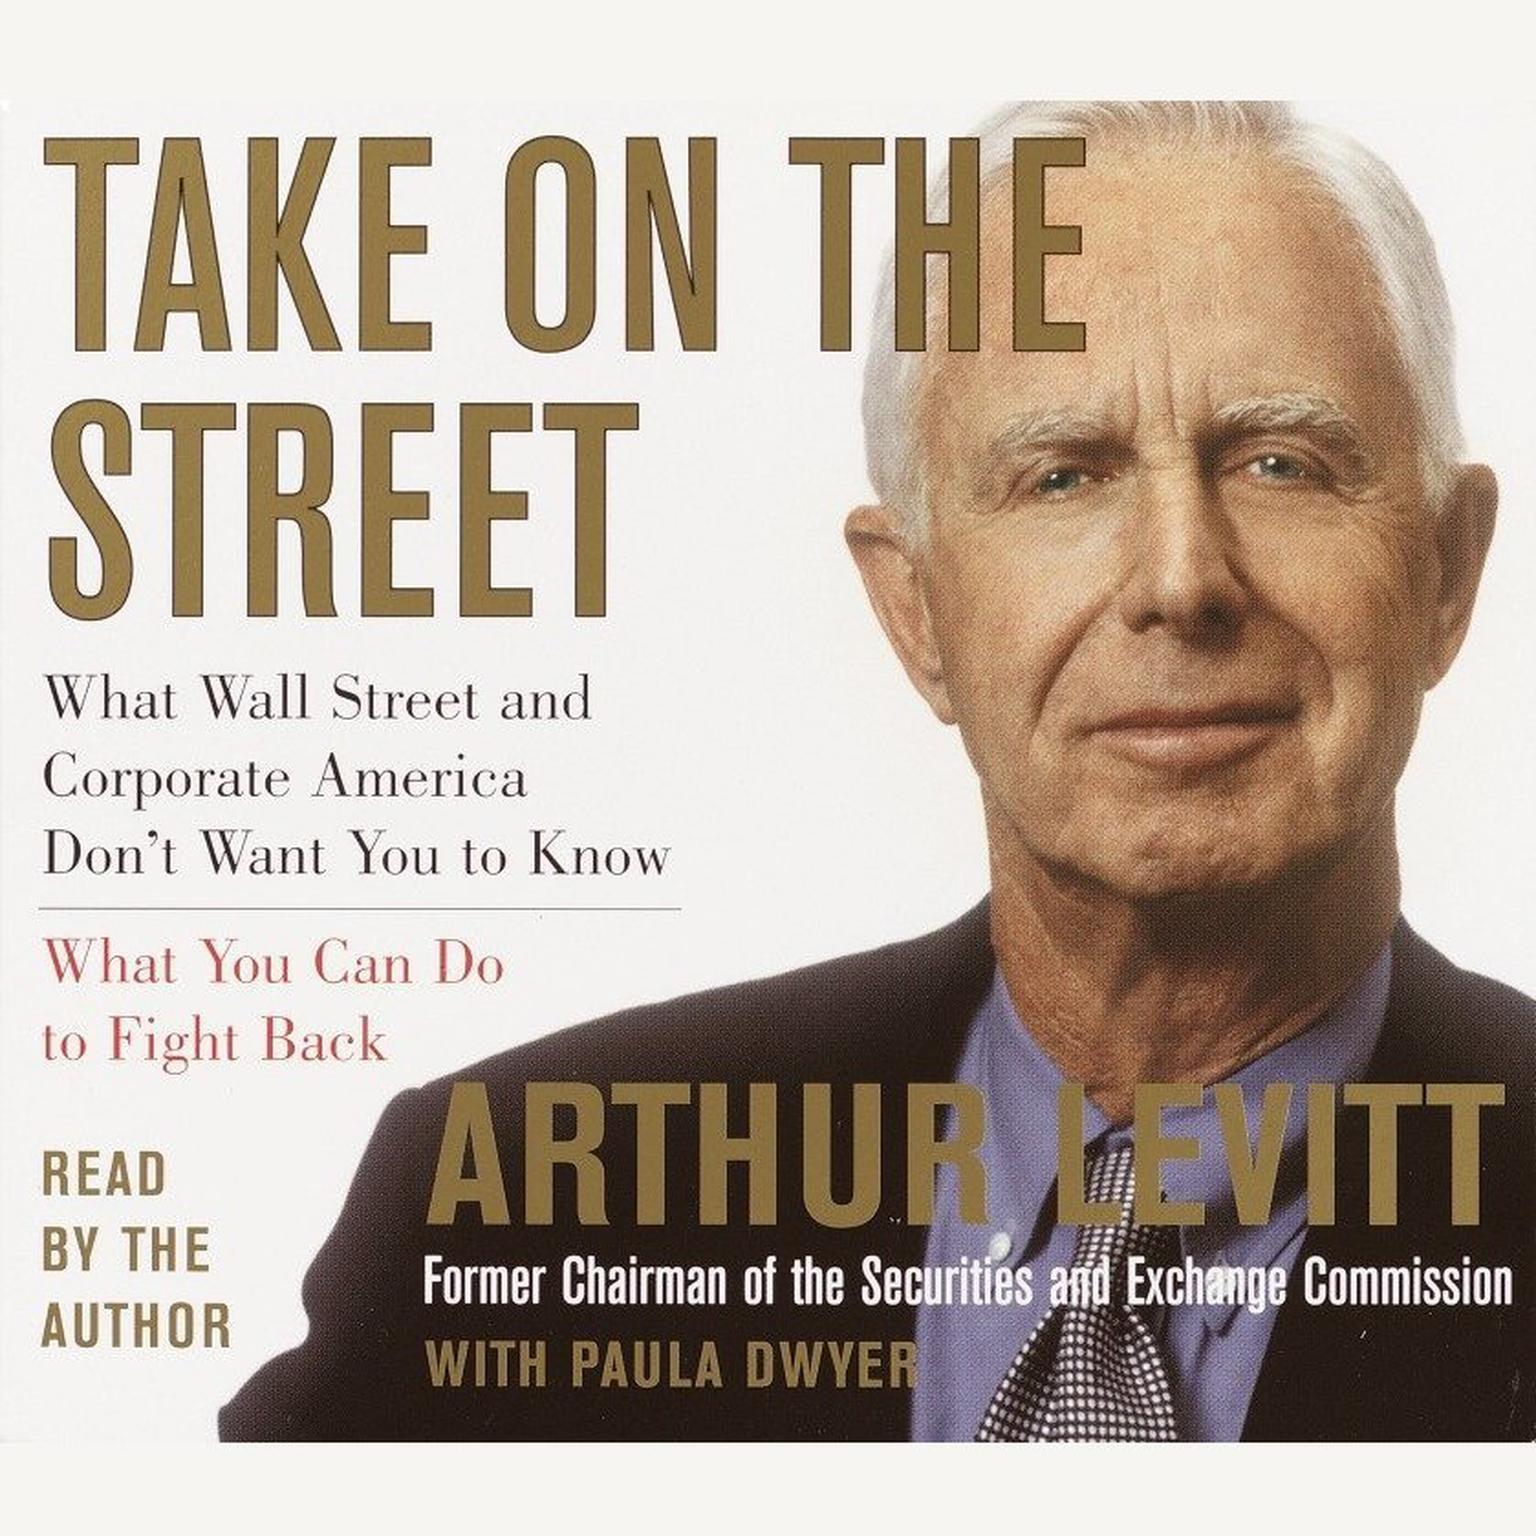 Take on the Street (Abridged): What Wall Street and Corporate America Dont Want You to Know and How You Can Fight Back Audiobook, by Arthur Levitt